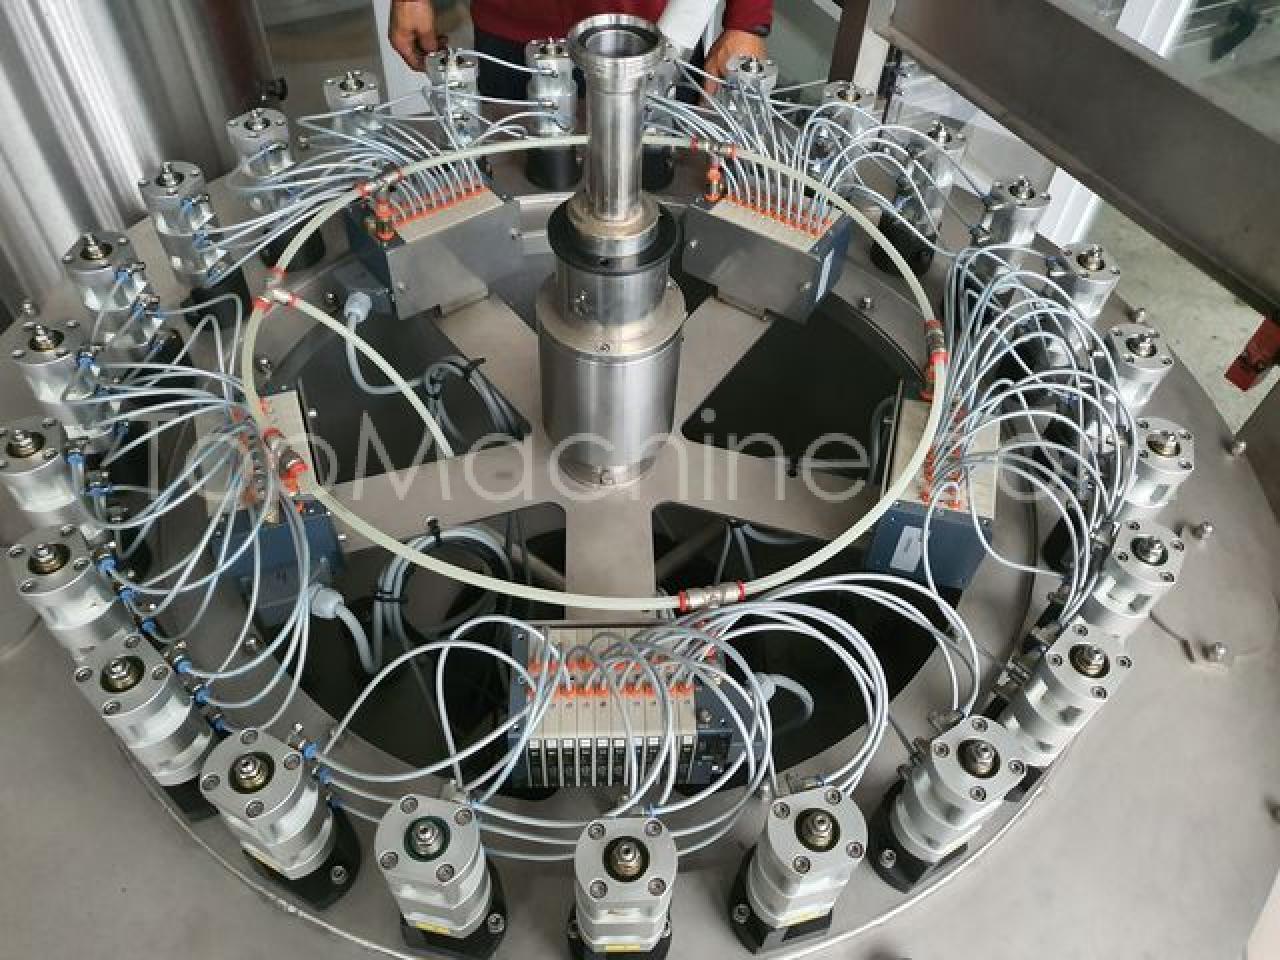 Used Envastronic S24E2BT8 TedeltaG Beverages & Liquids Mineral water filling